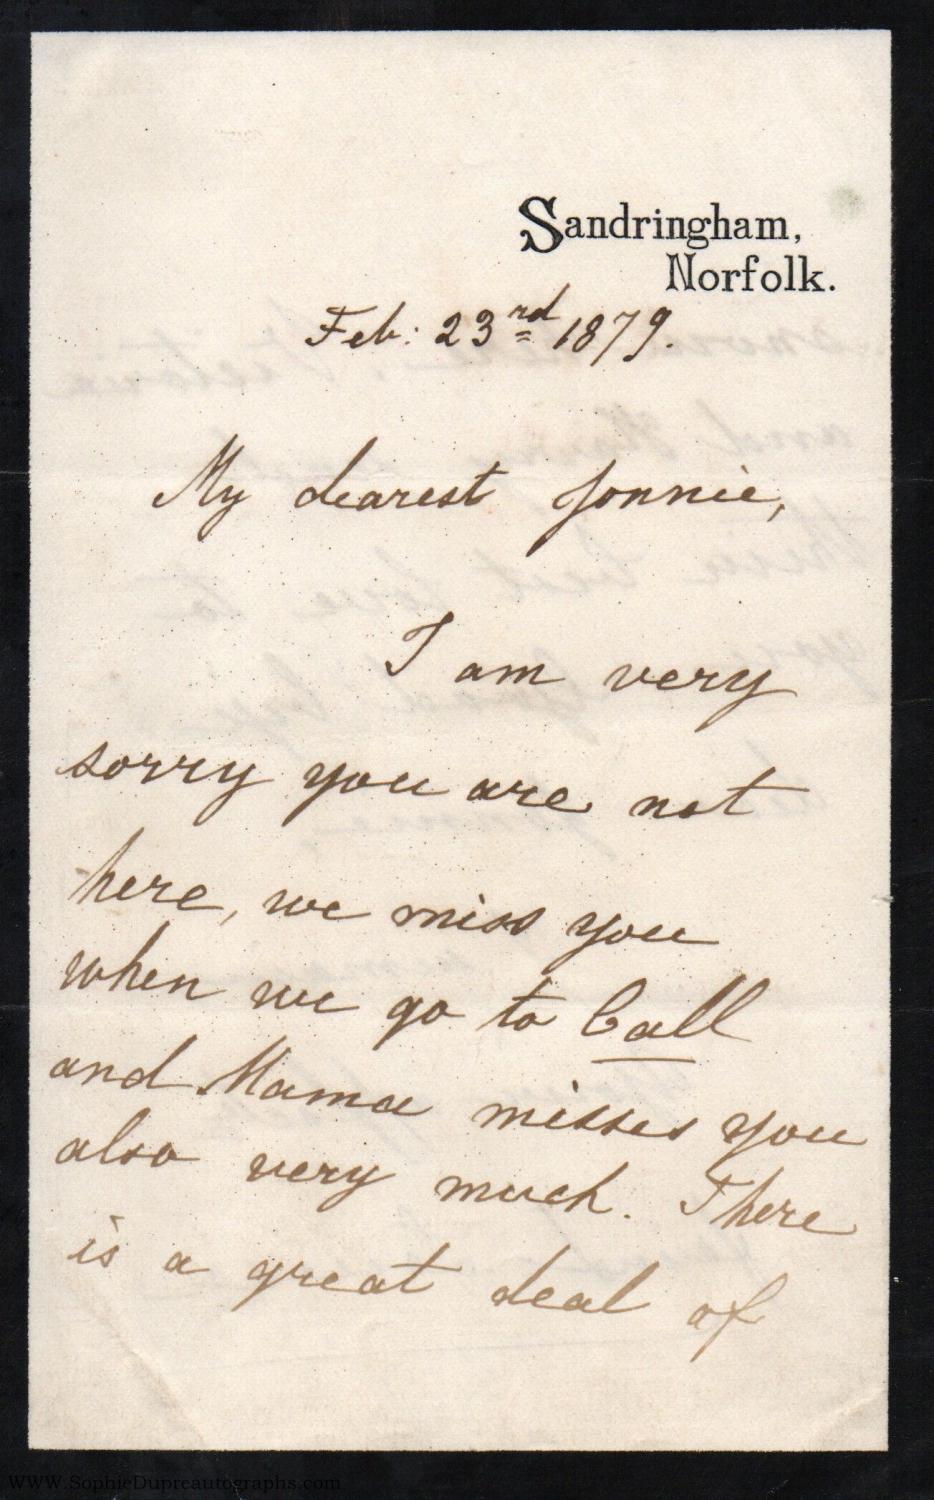 Early Autograph Letter Signed To My Dearest Jonnie Alexandra Dagmar 1867 1931 Princess Royal Duchess Of Fife Daughter Of Edward Vii By Louise Victoria 1879 Manuscript Nbsp Nbsp Paper Nbsp Collectible Sophie Dupre Aba Ilab Pada